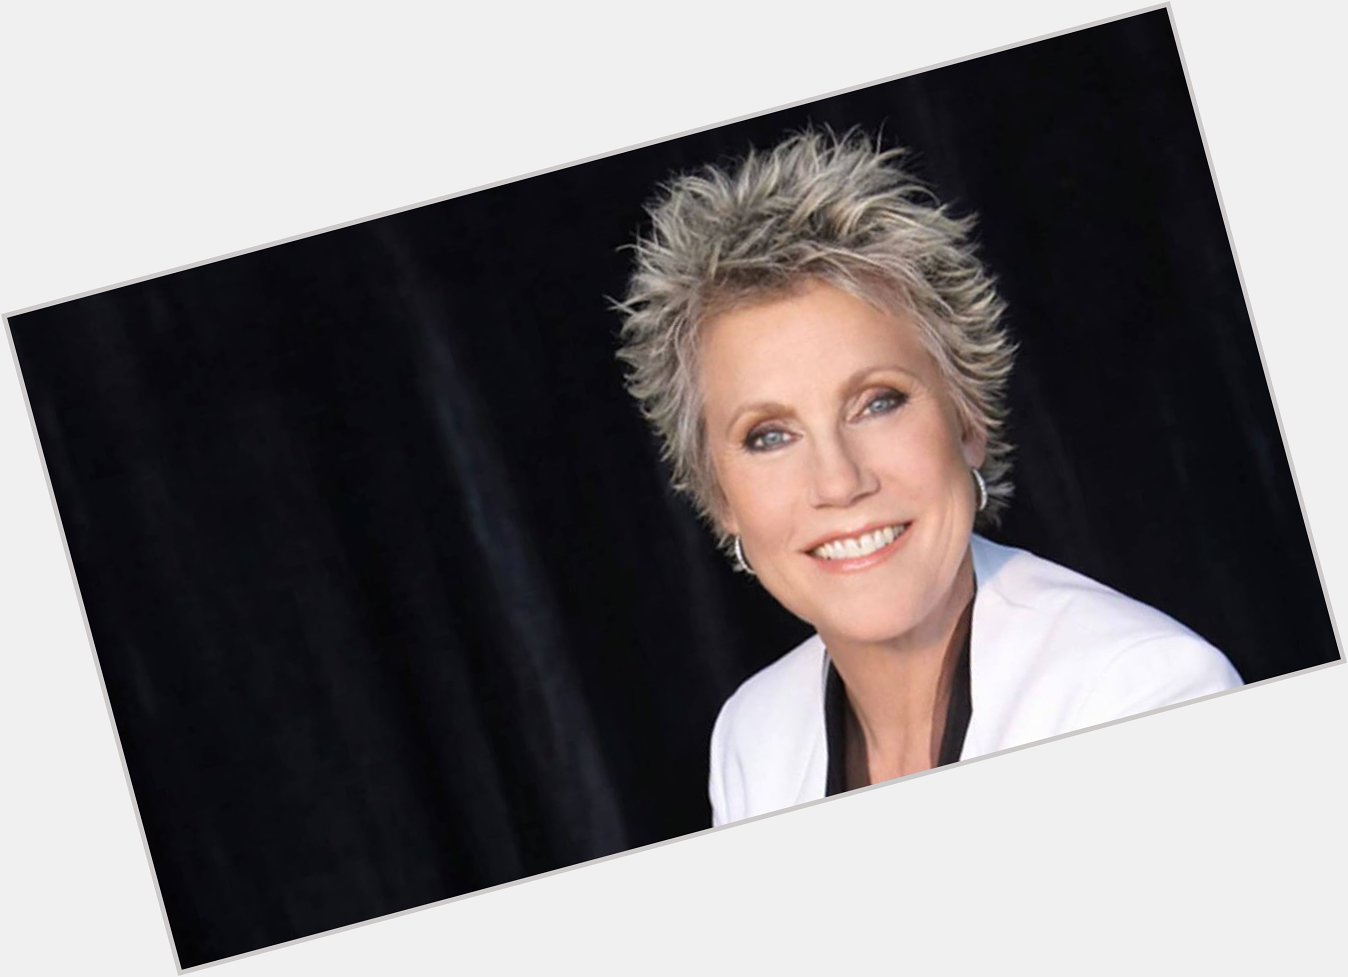 Wishing Anne Murray a very HAPPY BIRTHDAY today! 